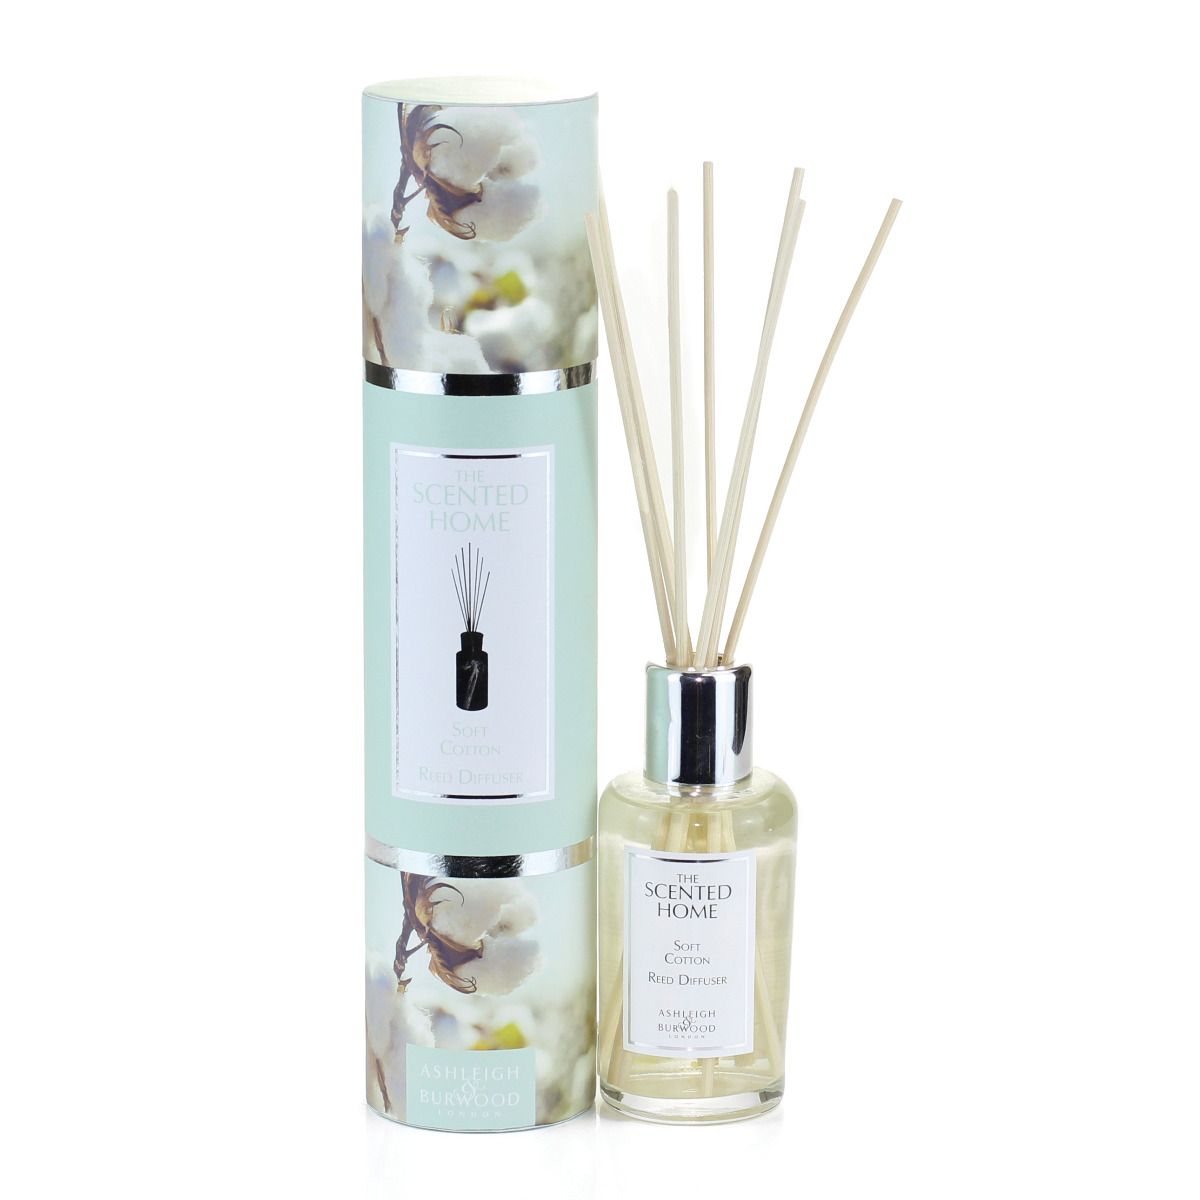 The Scented Home Reed Diffuser - Soft Cotton